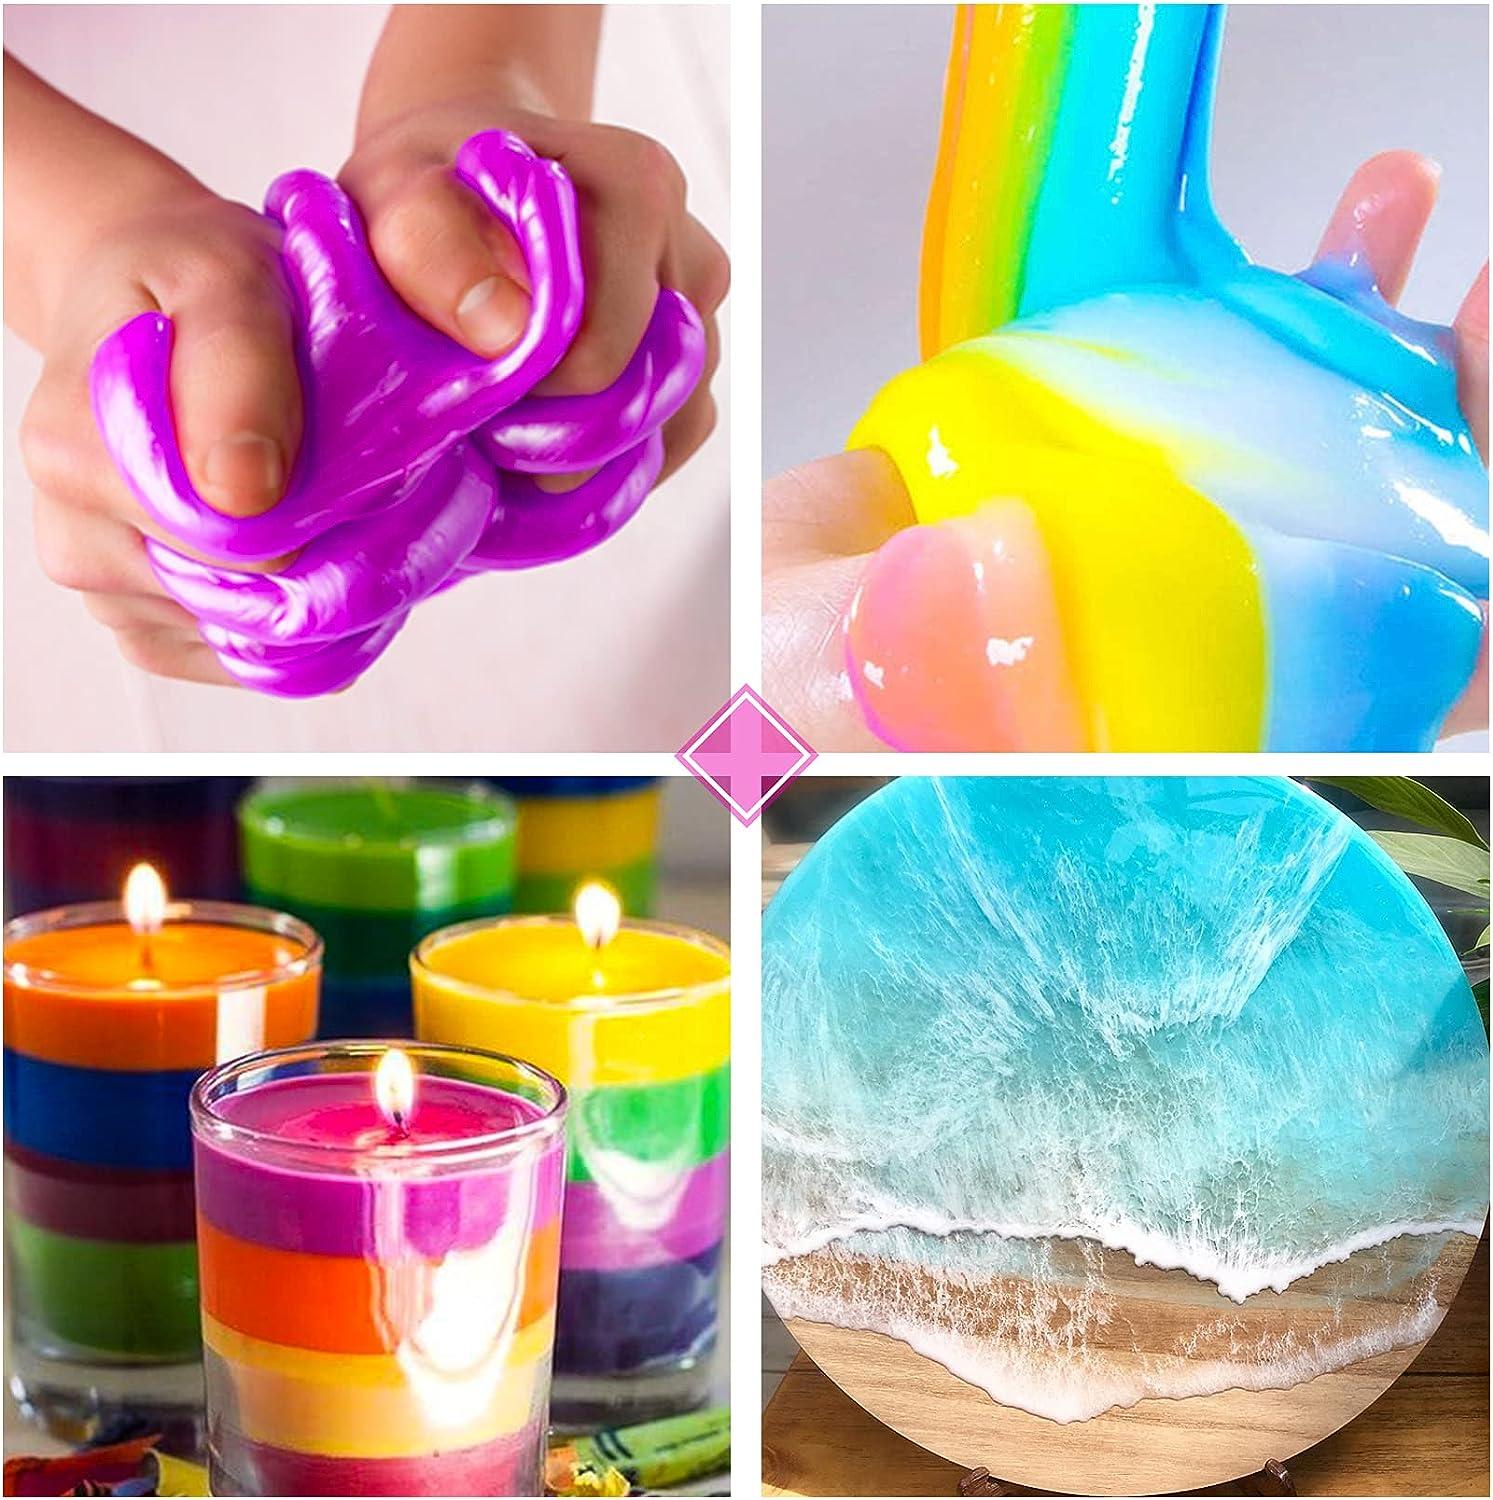 30-color 20ml Epoxy Resin Pigment Set Including Candle Dye, Mica Powder For  Diy Resin Molds, Jewelry Making Dyed Soap, Candles